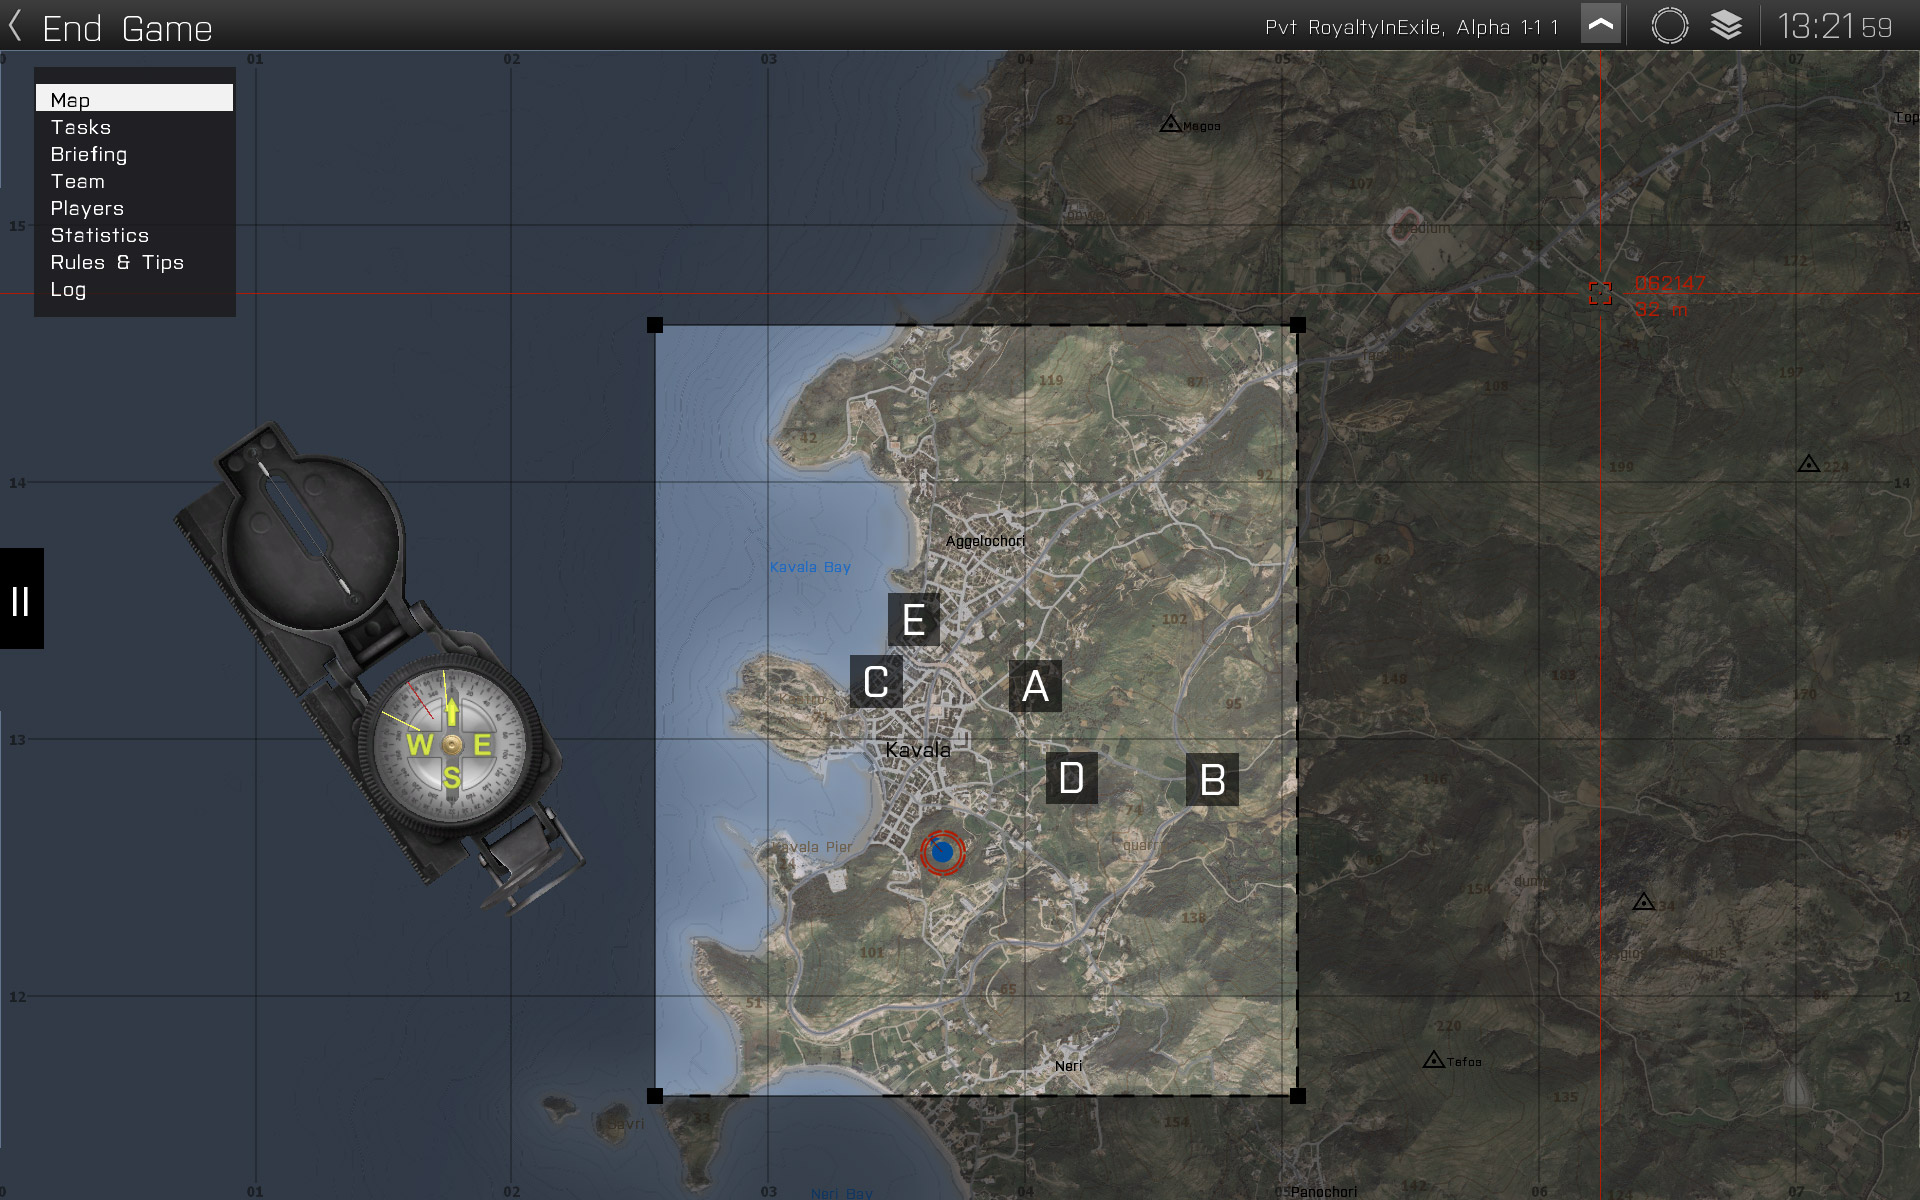 Arma 3: Contact expansion announced: release date, map, and more - Polygon